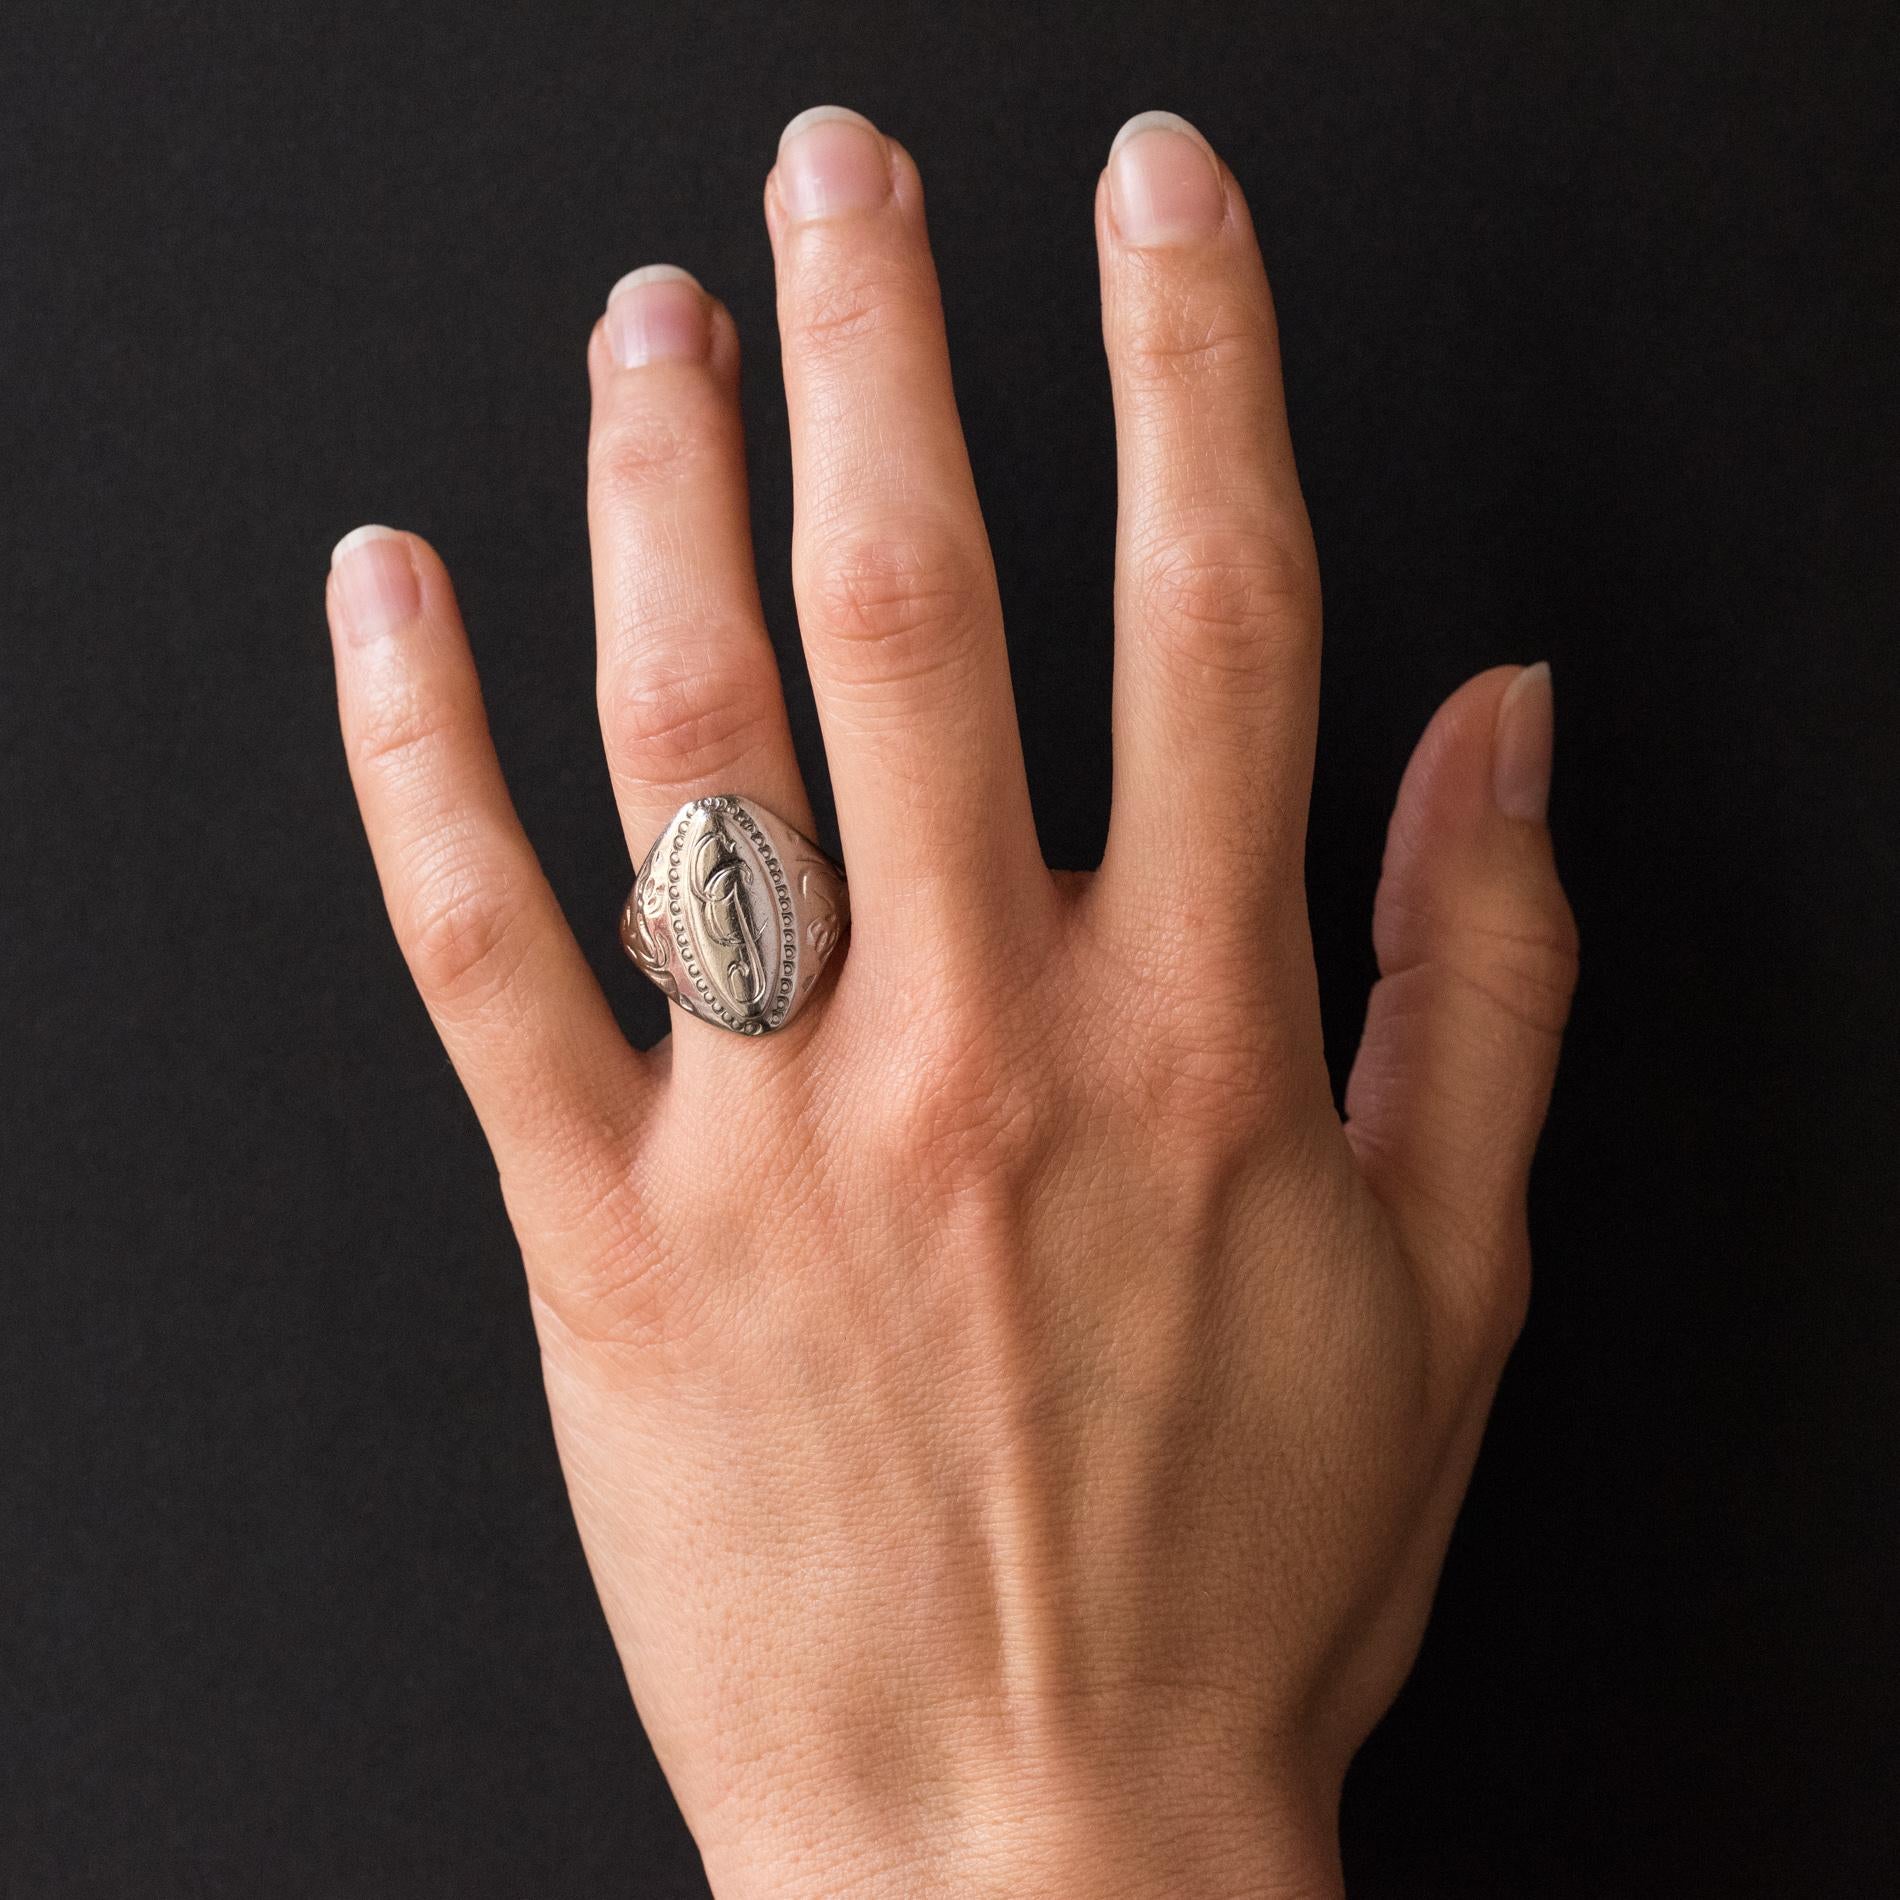 Ring in silver.
The top of this signet ring is shuttle-shaped, the center is decorated with the initials GC surrounded by a beaded. On both sides, the start of the ring is chiseled with a plant motif. The carving is slightly weathered.
Height: 21